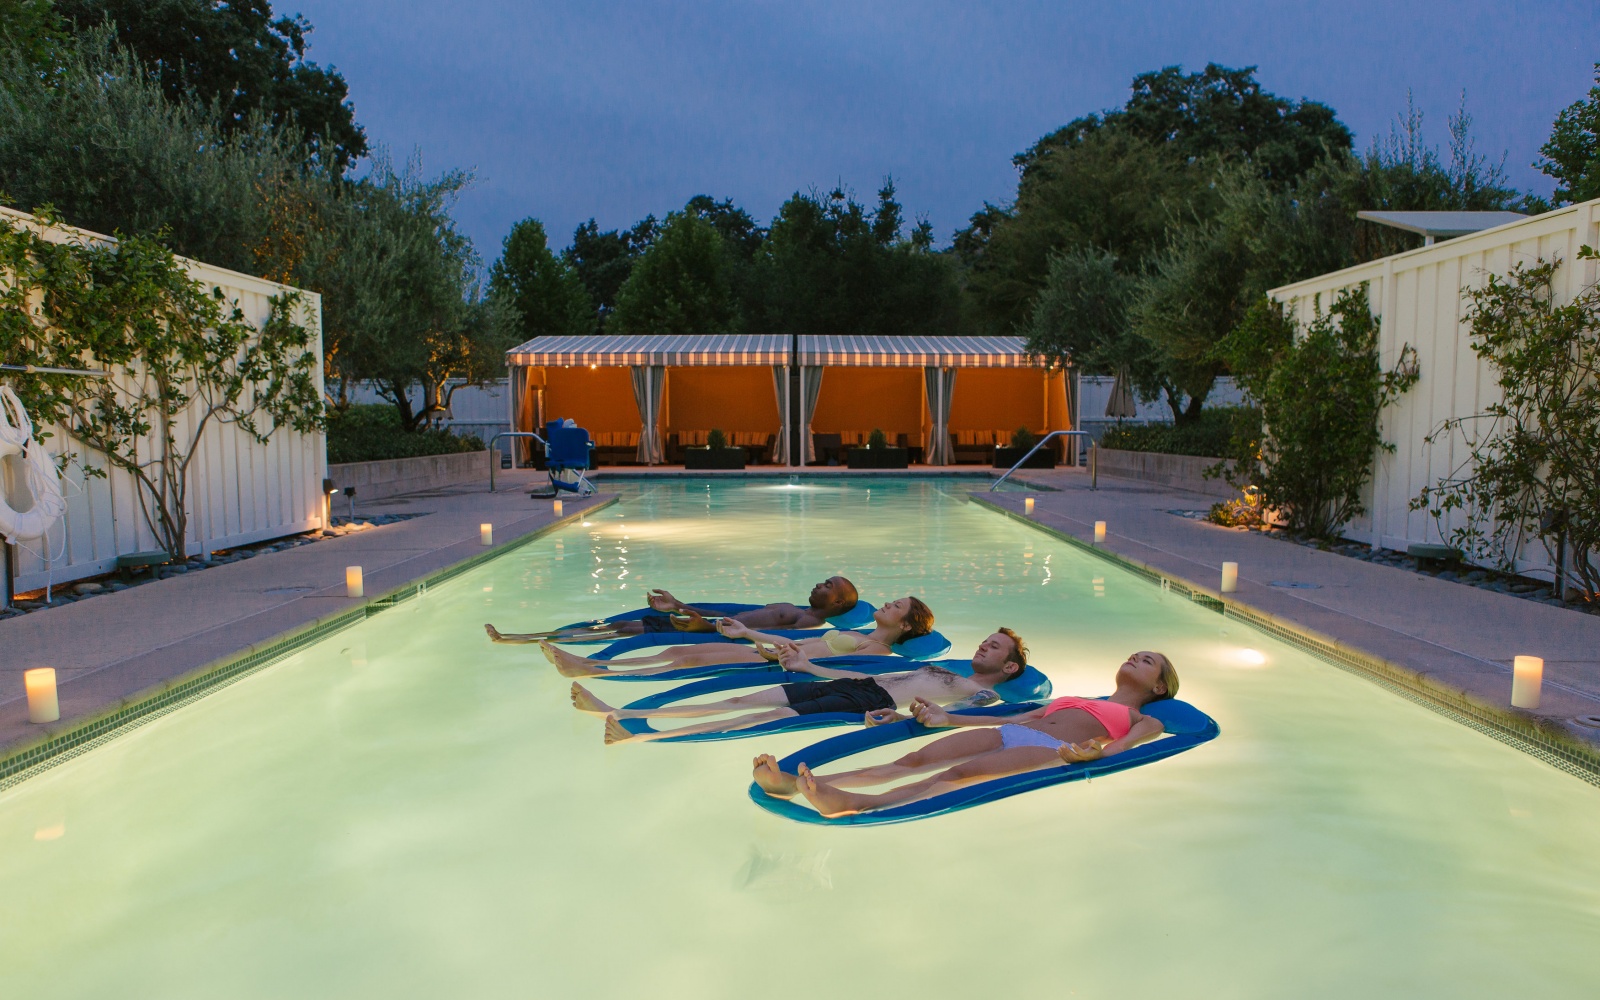 The Future Is Mental Wellness: At Solage Resort & Spa (Calistoga, California) you can experience “floating meditation” in the thermal pools.  Source: Solage Resort & Spa by Briana Marie